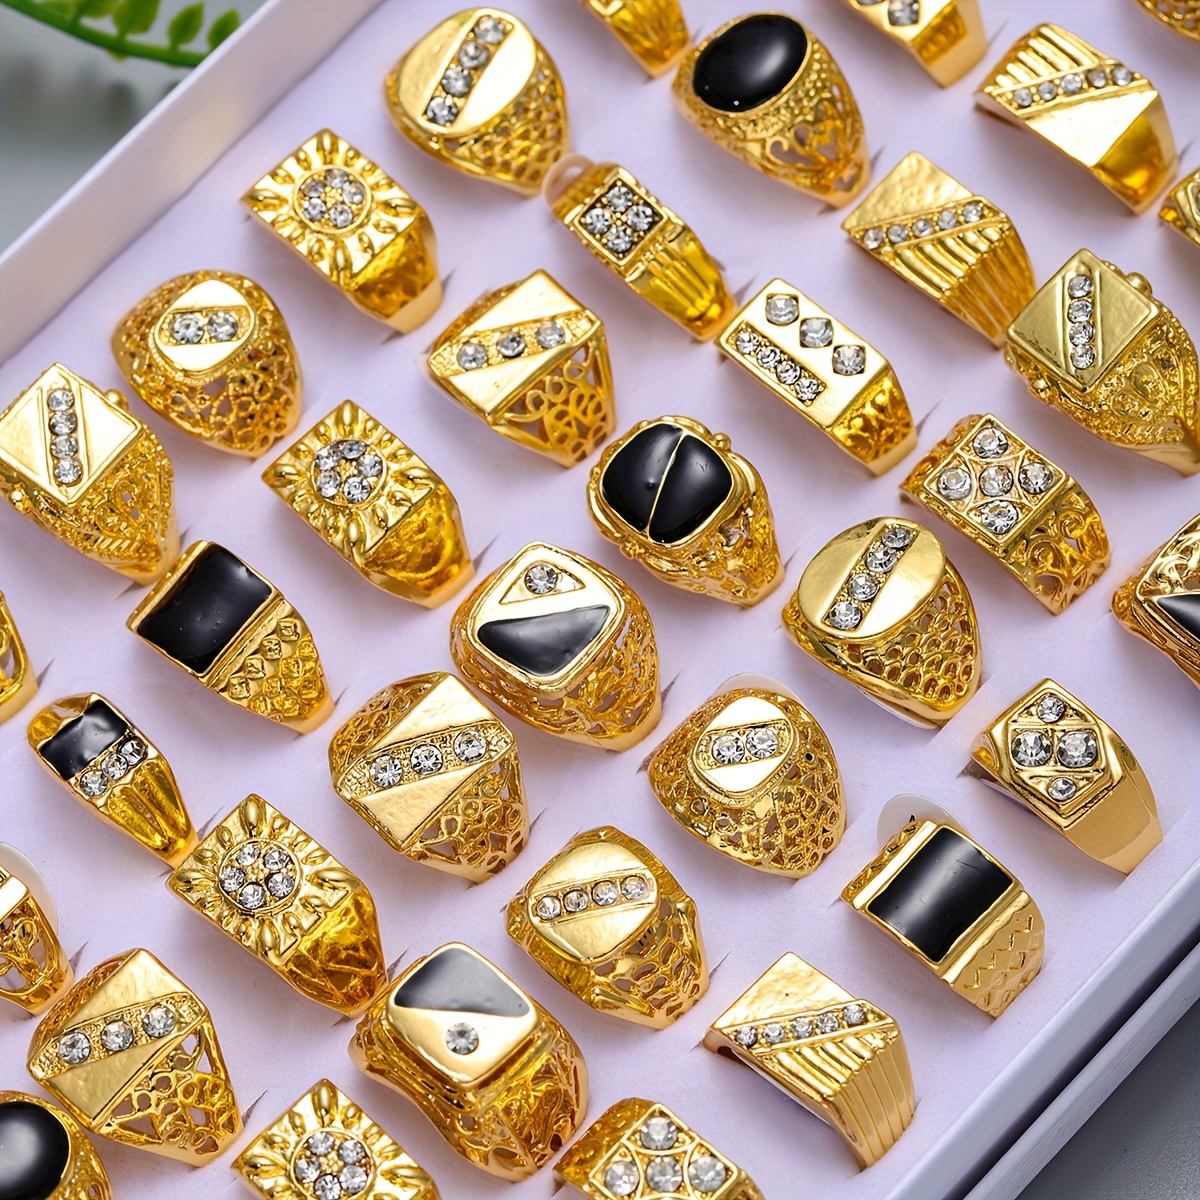 

20 Pieces Of Fashionable Jewelry Czech Rhinestone Enamel Tone Men's Rings, Women's Rings, Perfect Holiday Gifts Size And Style Is Random Box Is Not Include